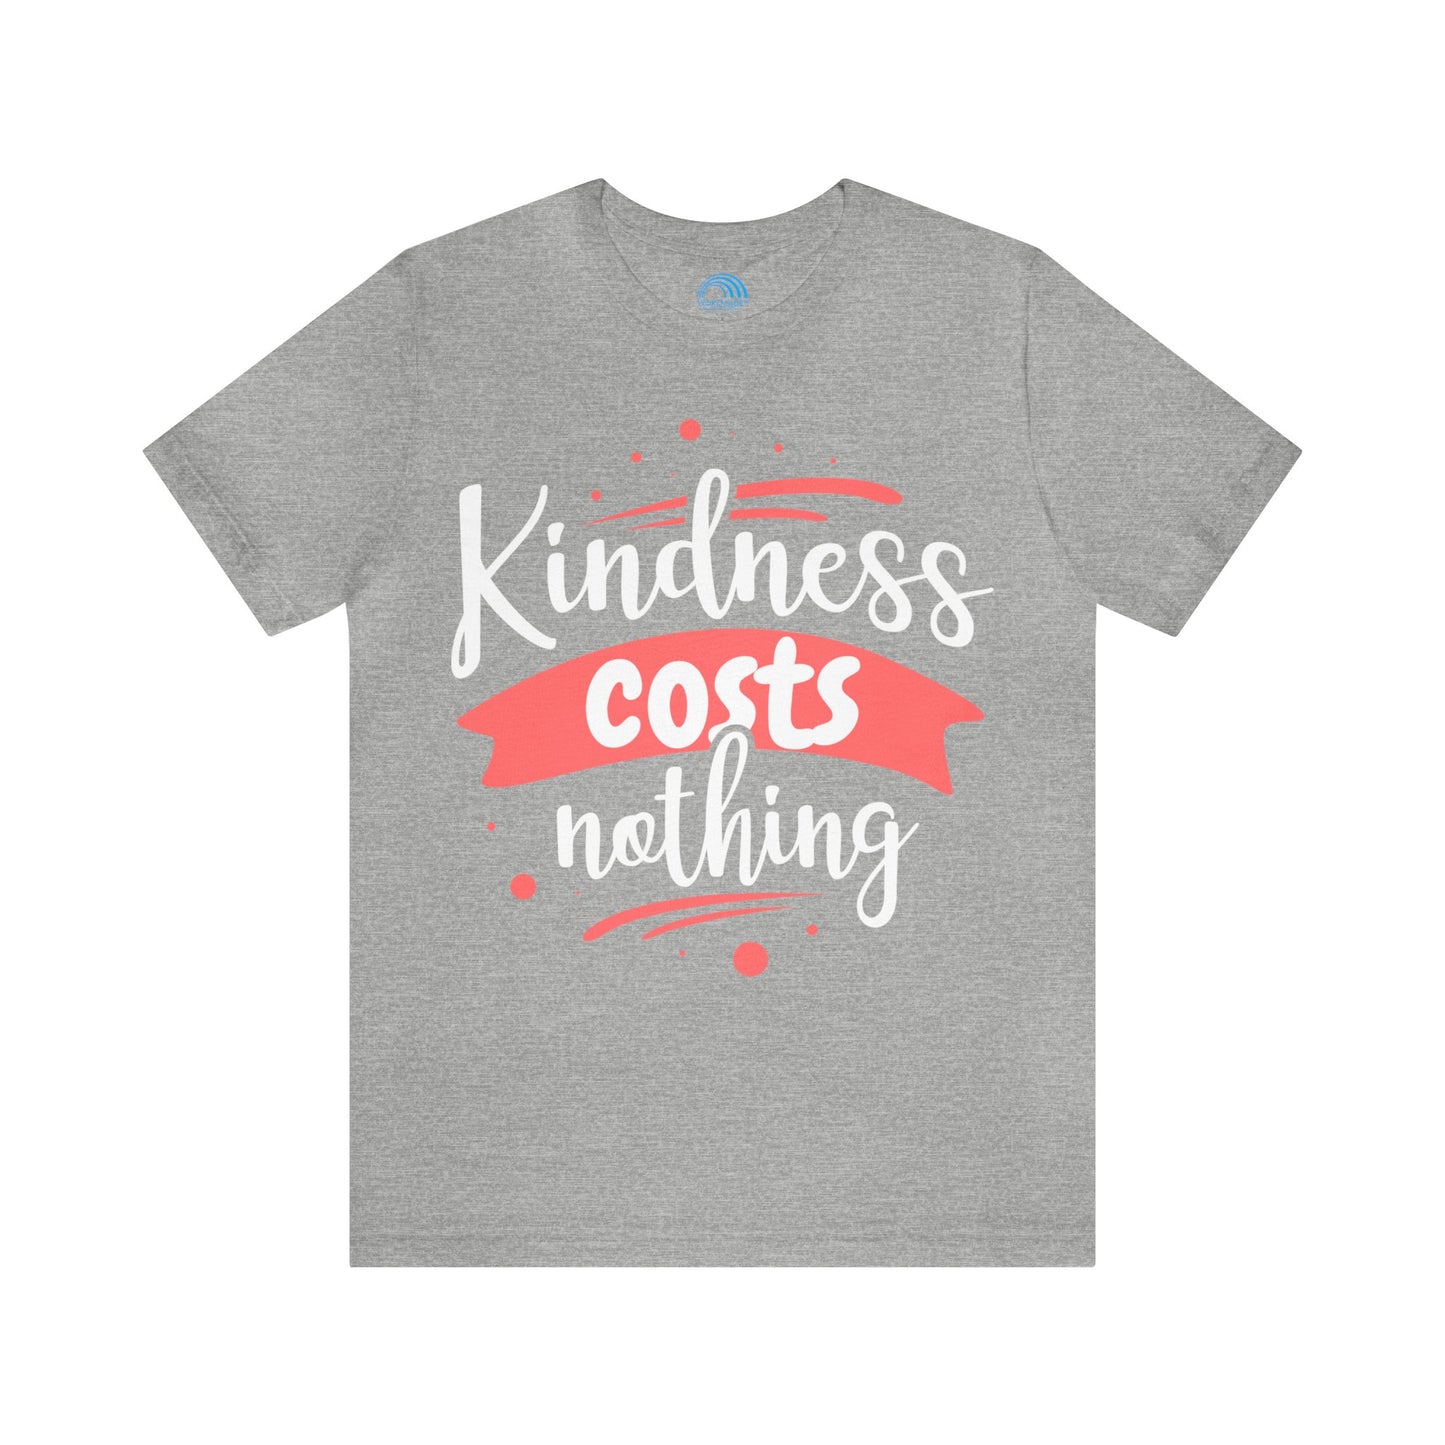 Kindness Costs Nothing